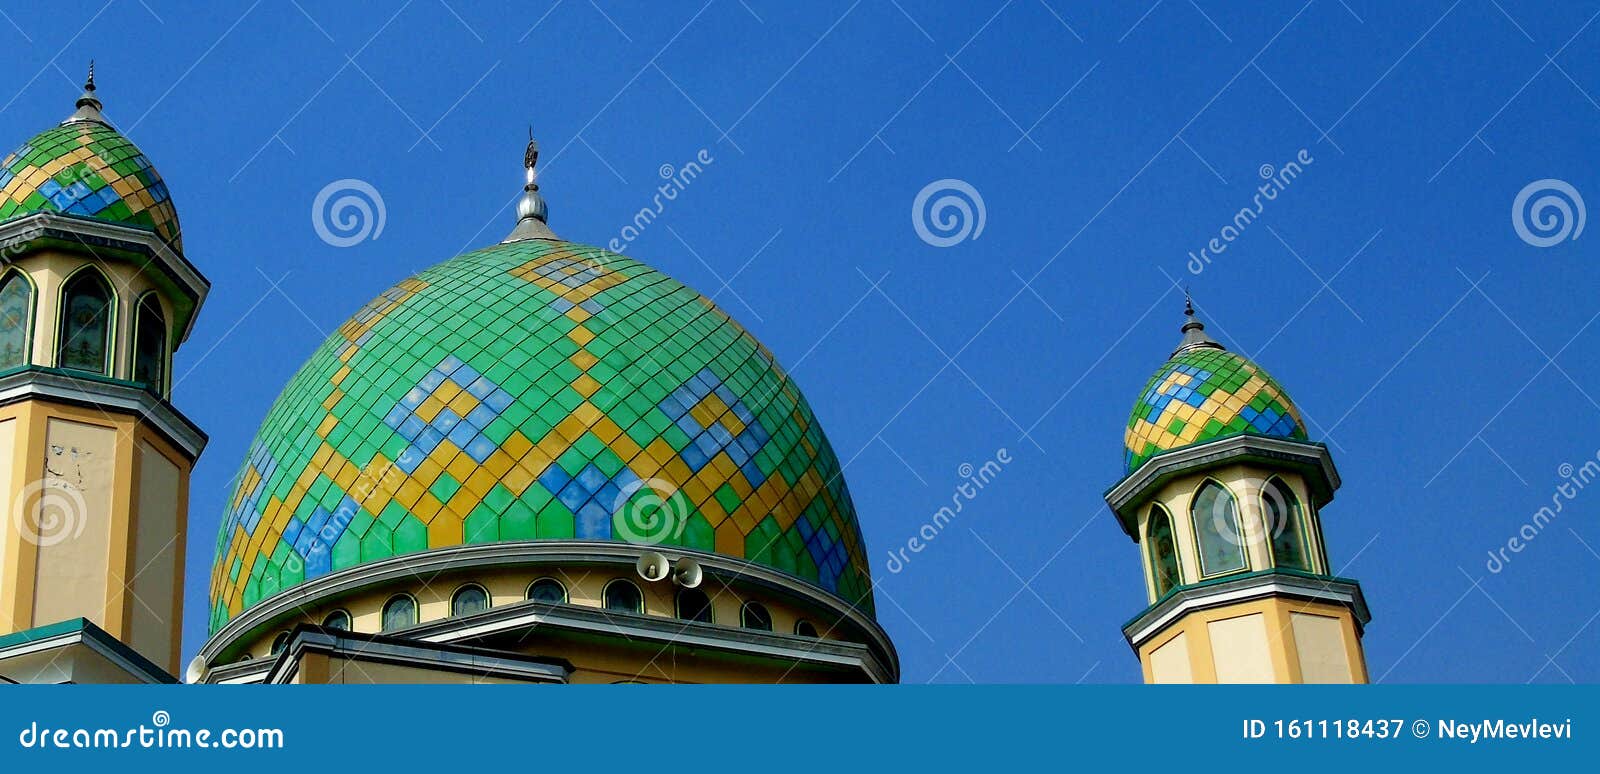 apt-hamster920: Imam Ali Al Rida mosque view with green happiness background